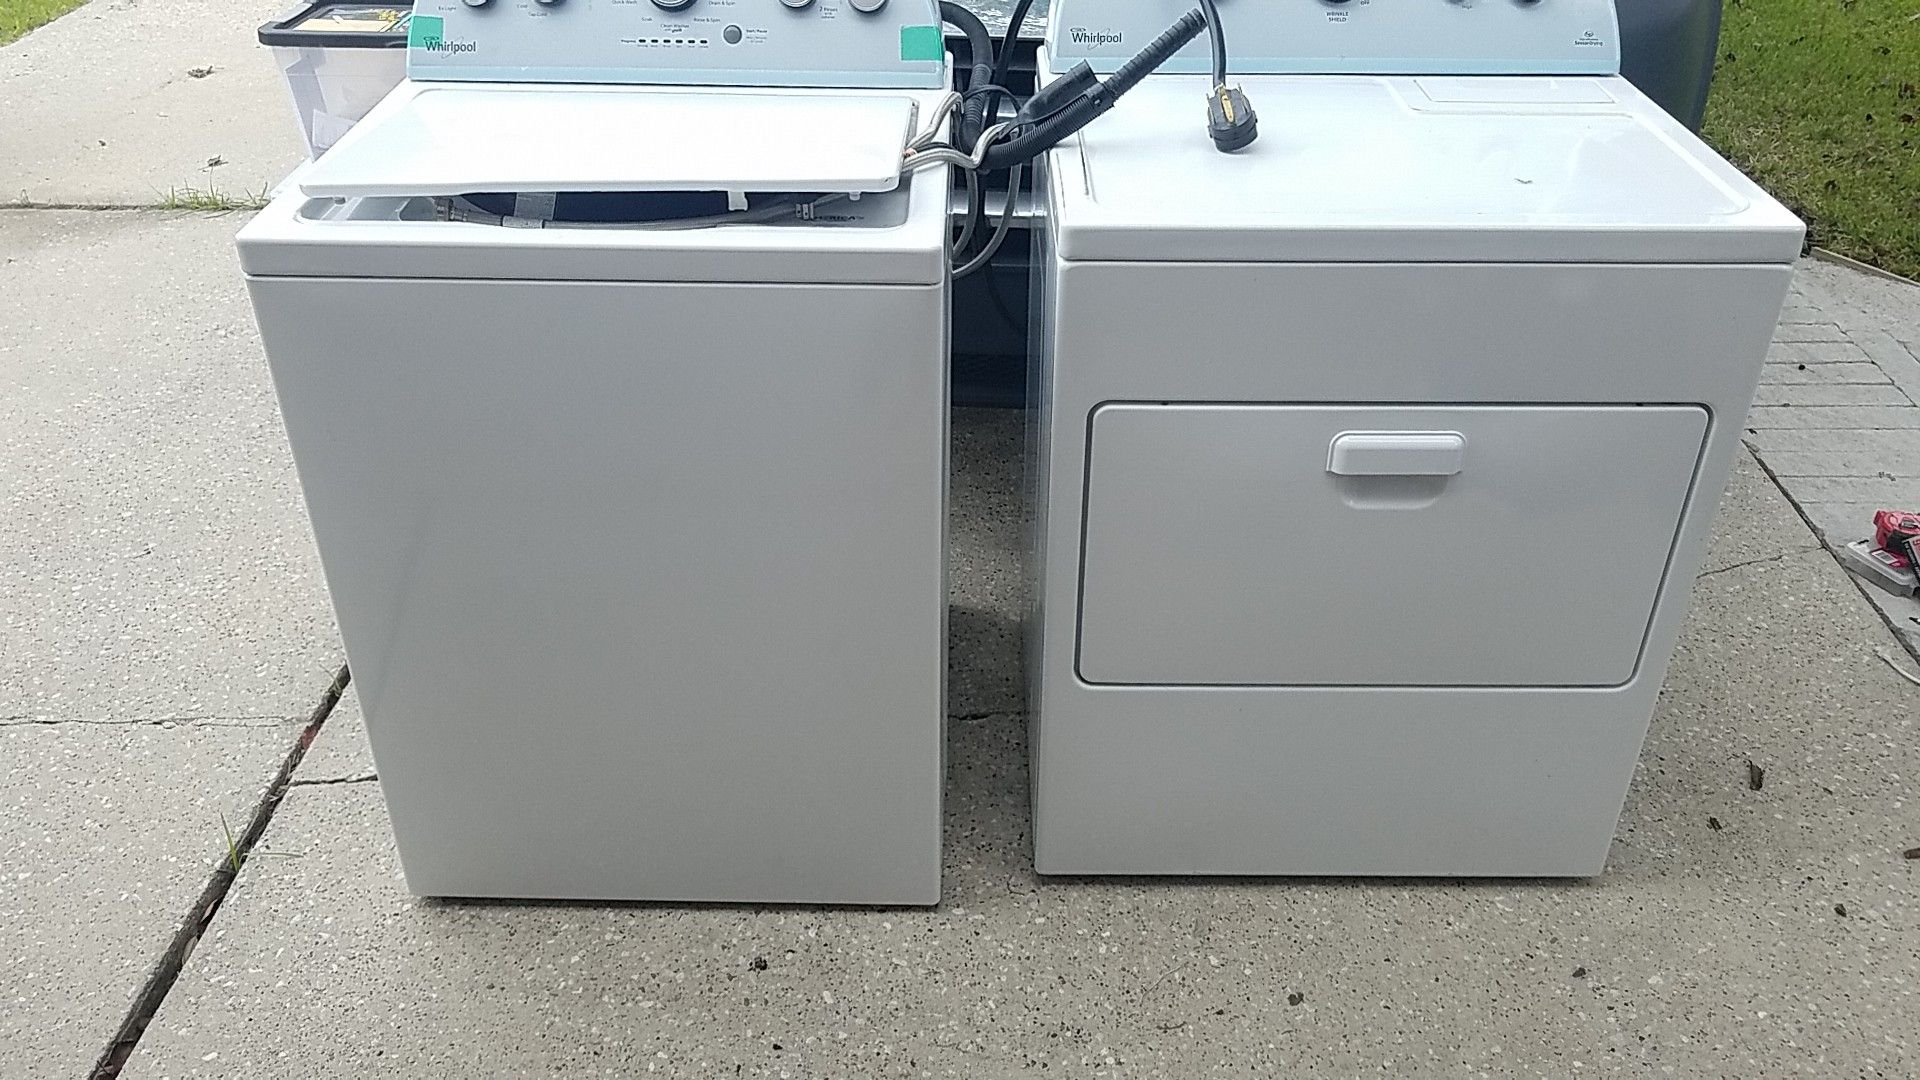 Whirlpool washer and dryer combo